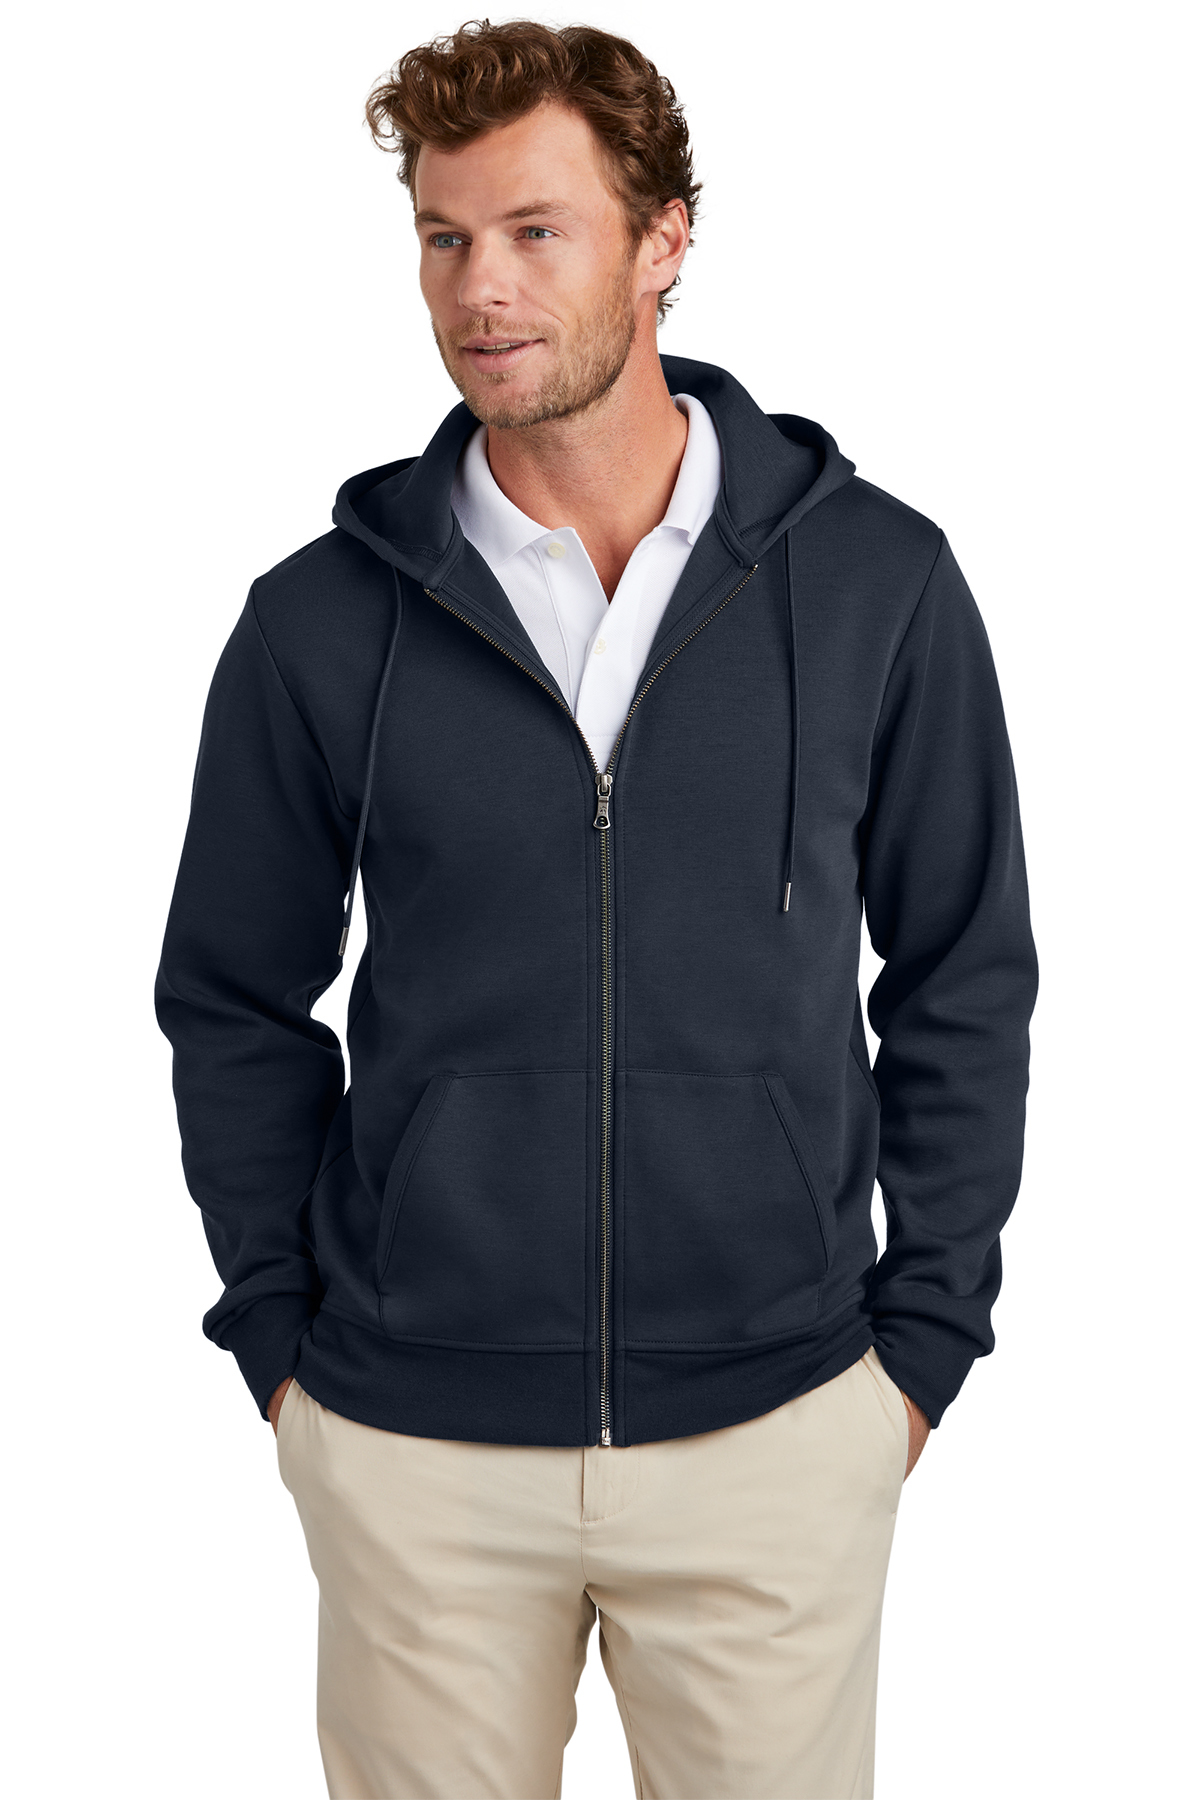 Brooks Brothers Double-Knit Full-Zip Hoodie | Product | SanMar